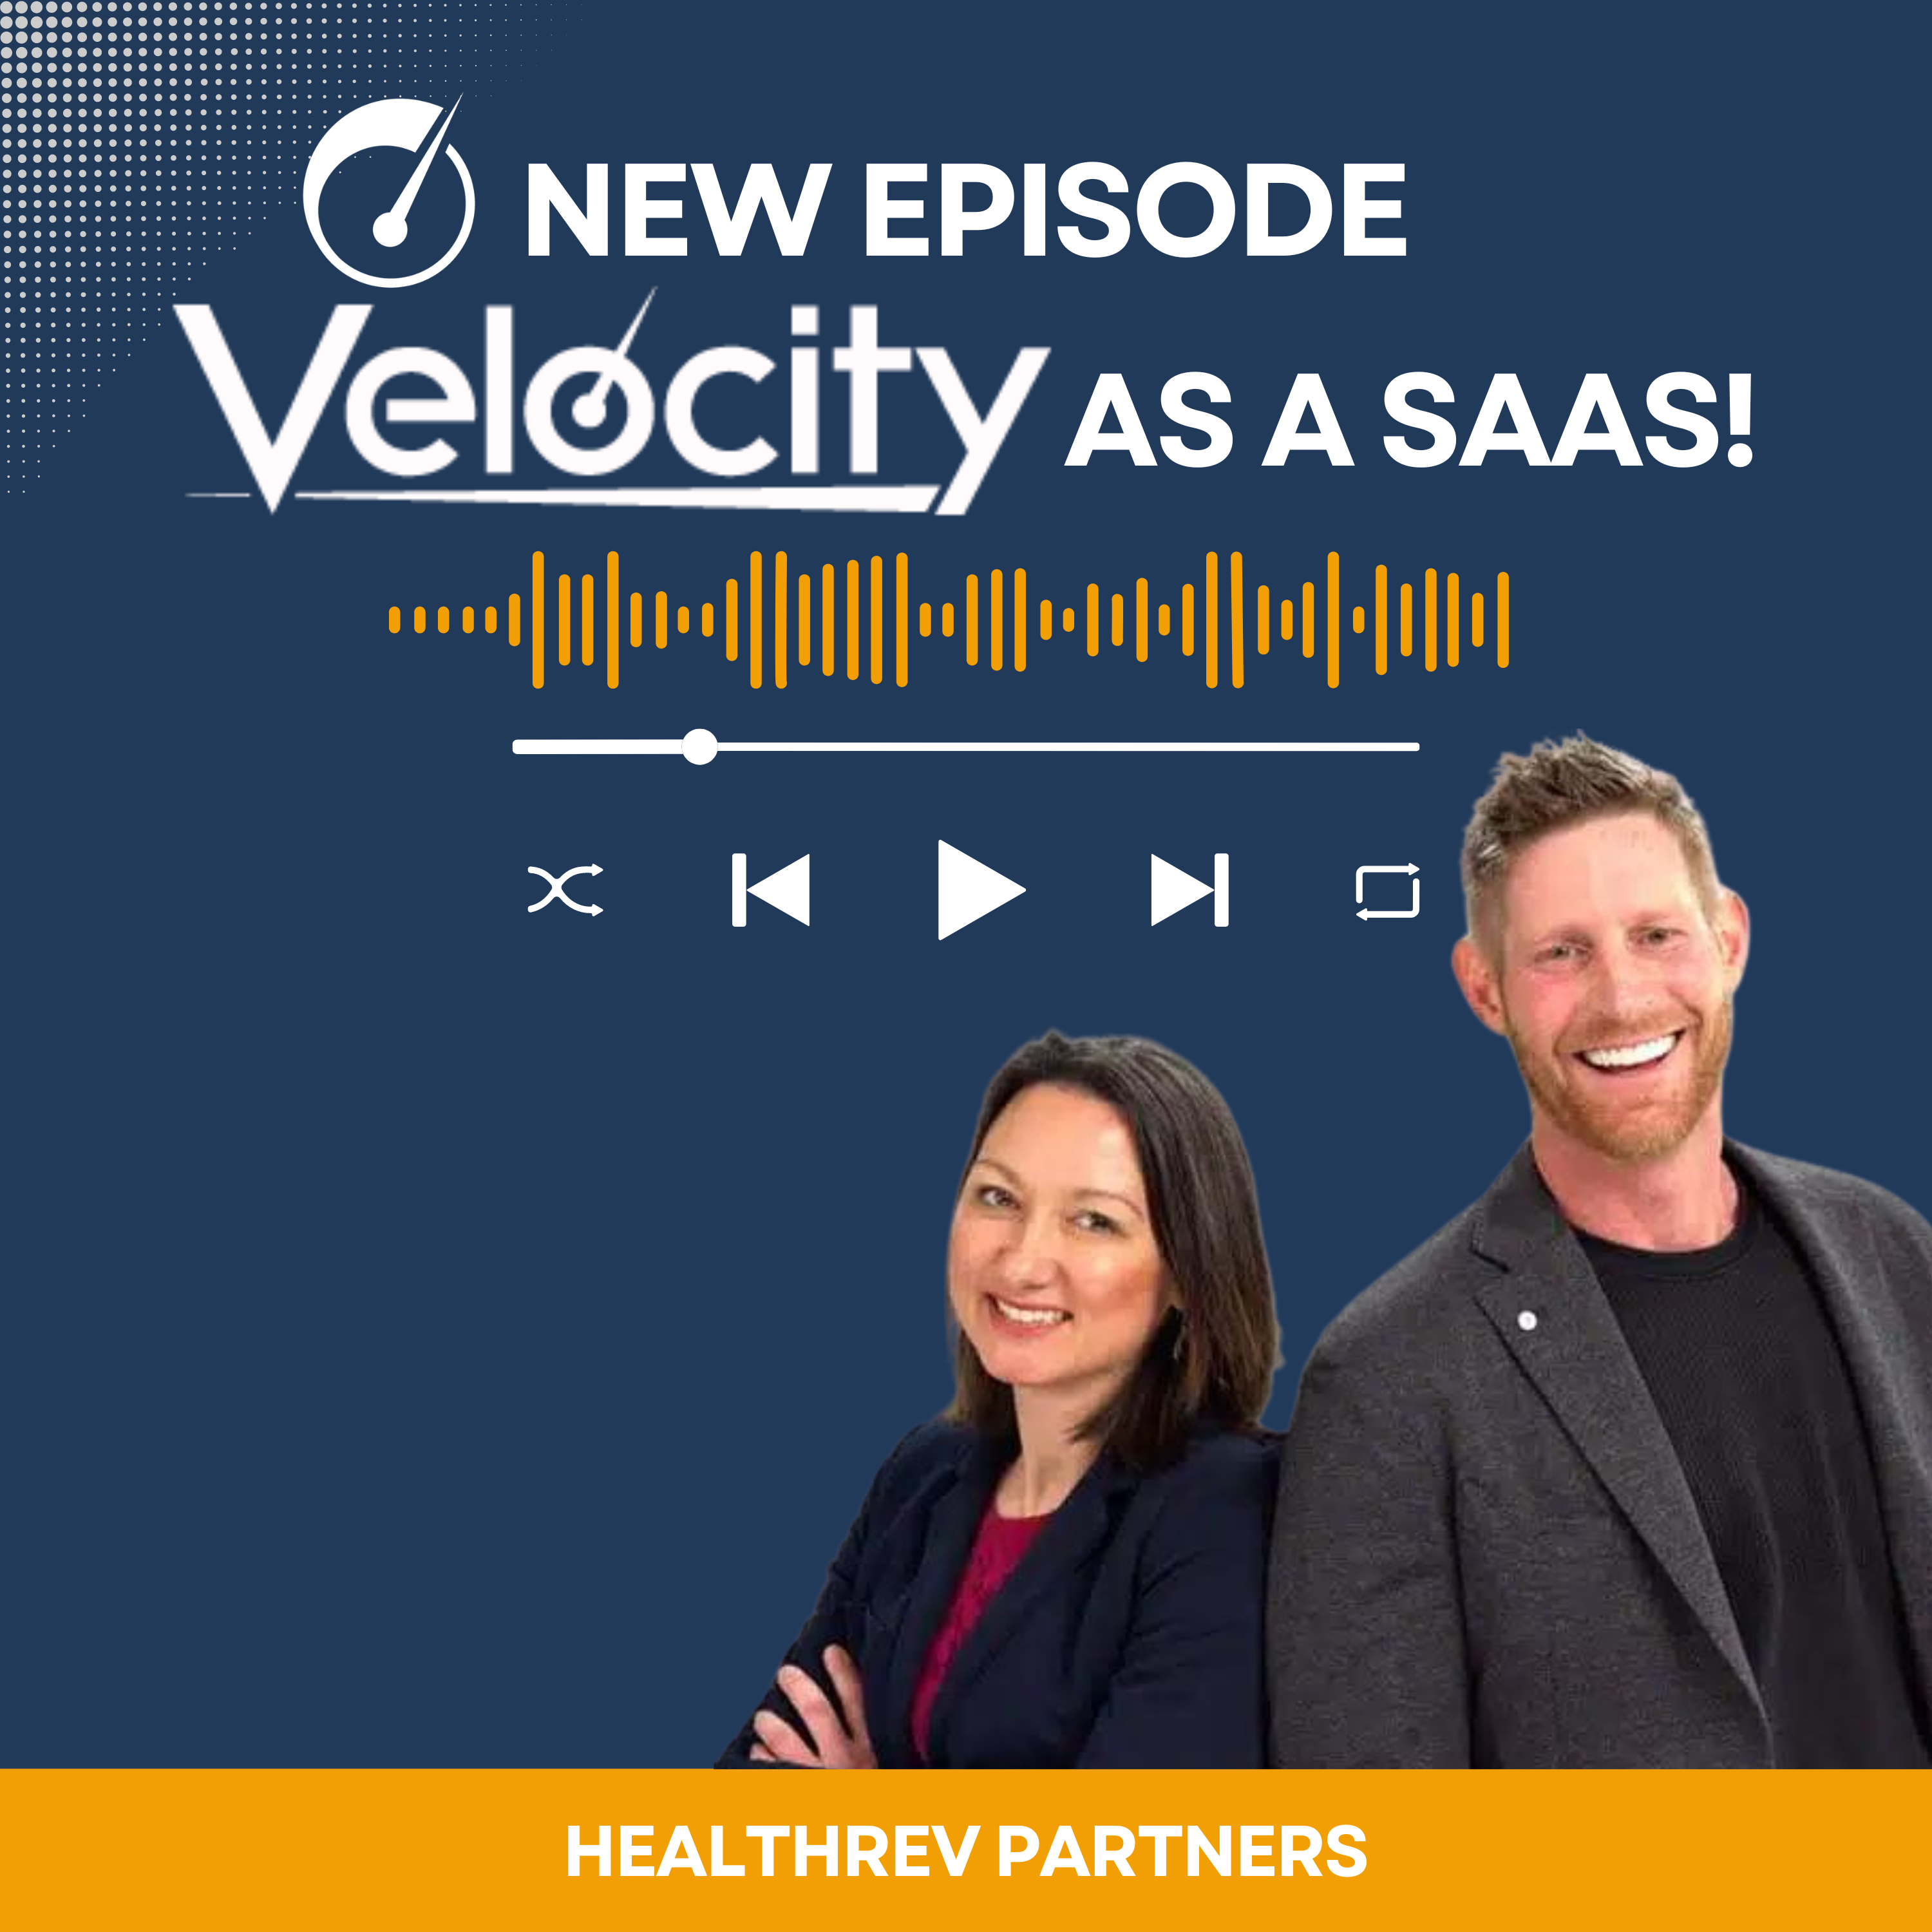 Velocity as a Saas Solution, Interview with Michael Greenlee, Founder and CEO of HealthRev Partners